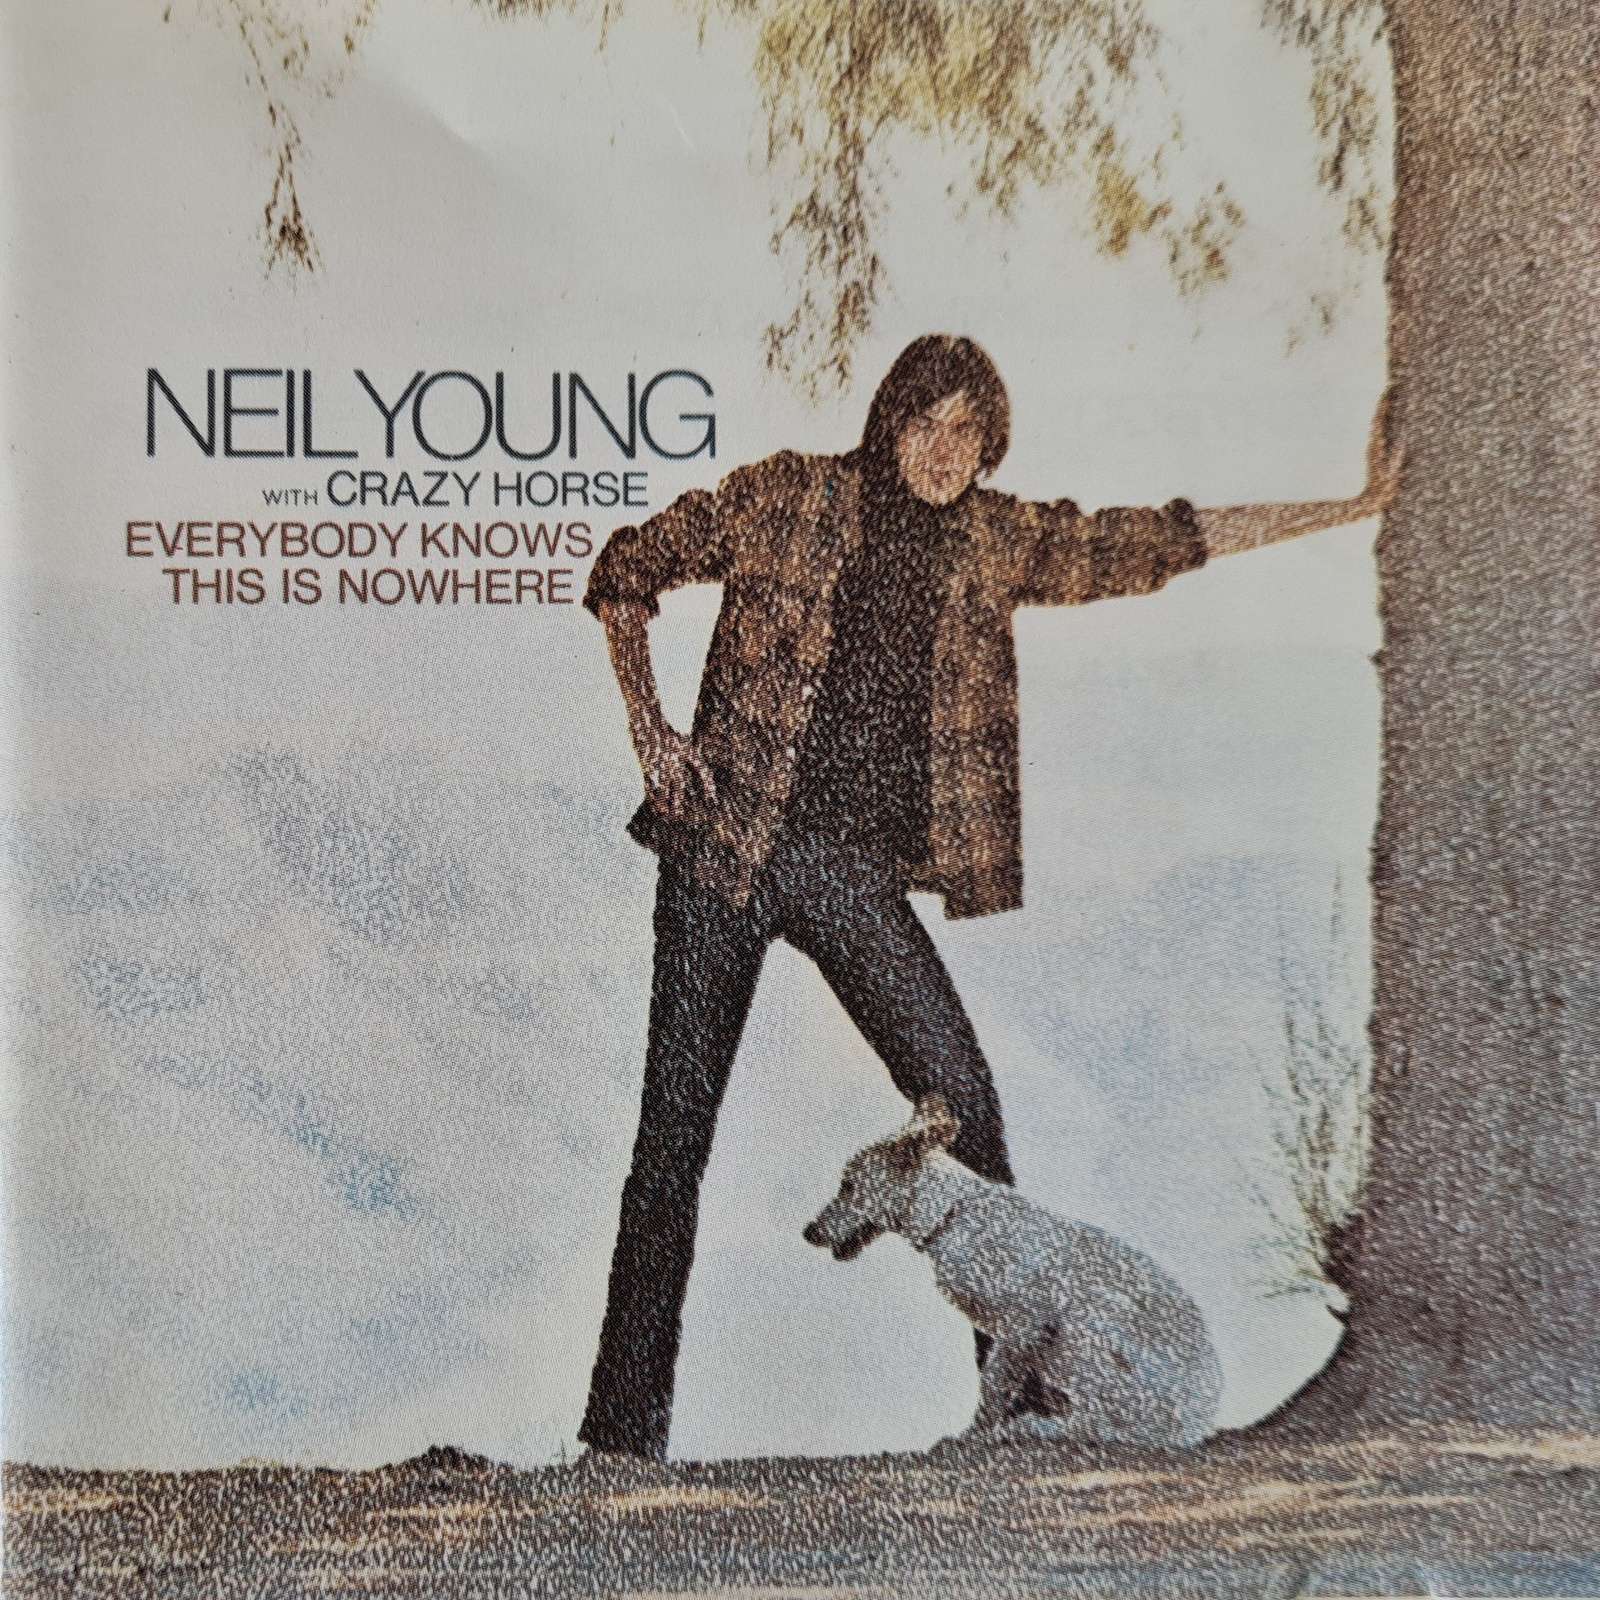 Neil Young with Crazy Horse - Everybody Knows this is Nowhere (CD)